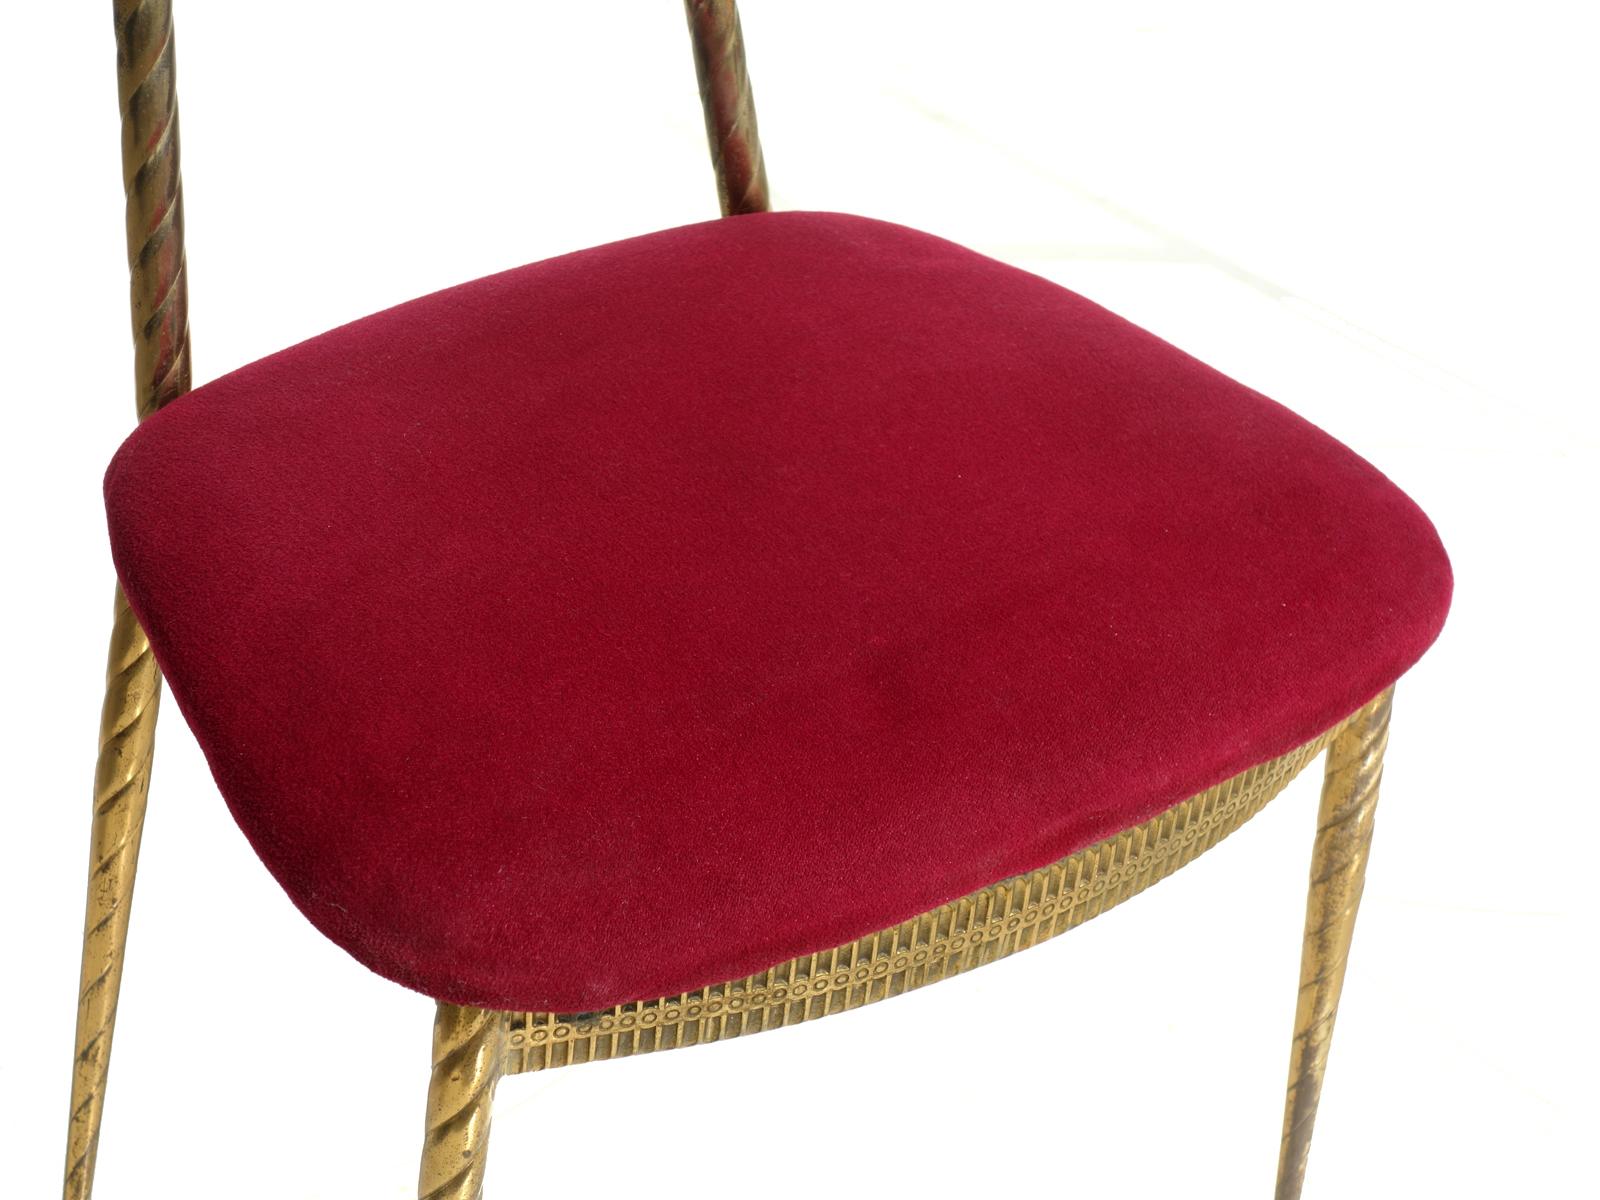 Rare brass chairs
Red velvet upholstery
Excellent condition.